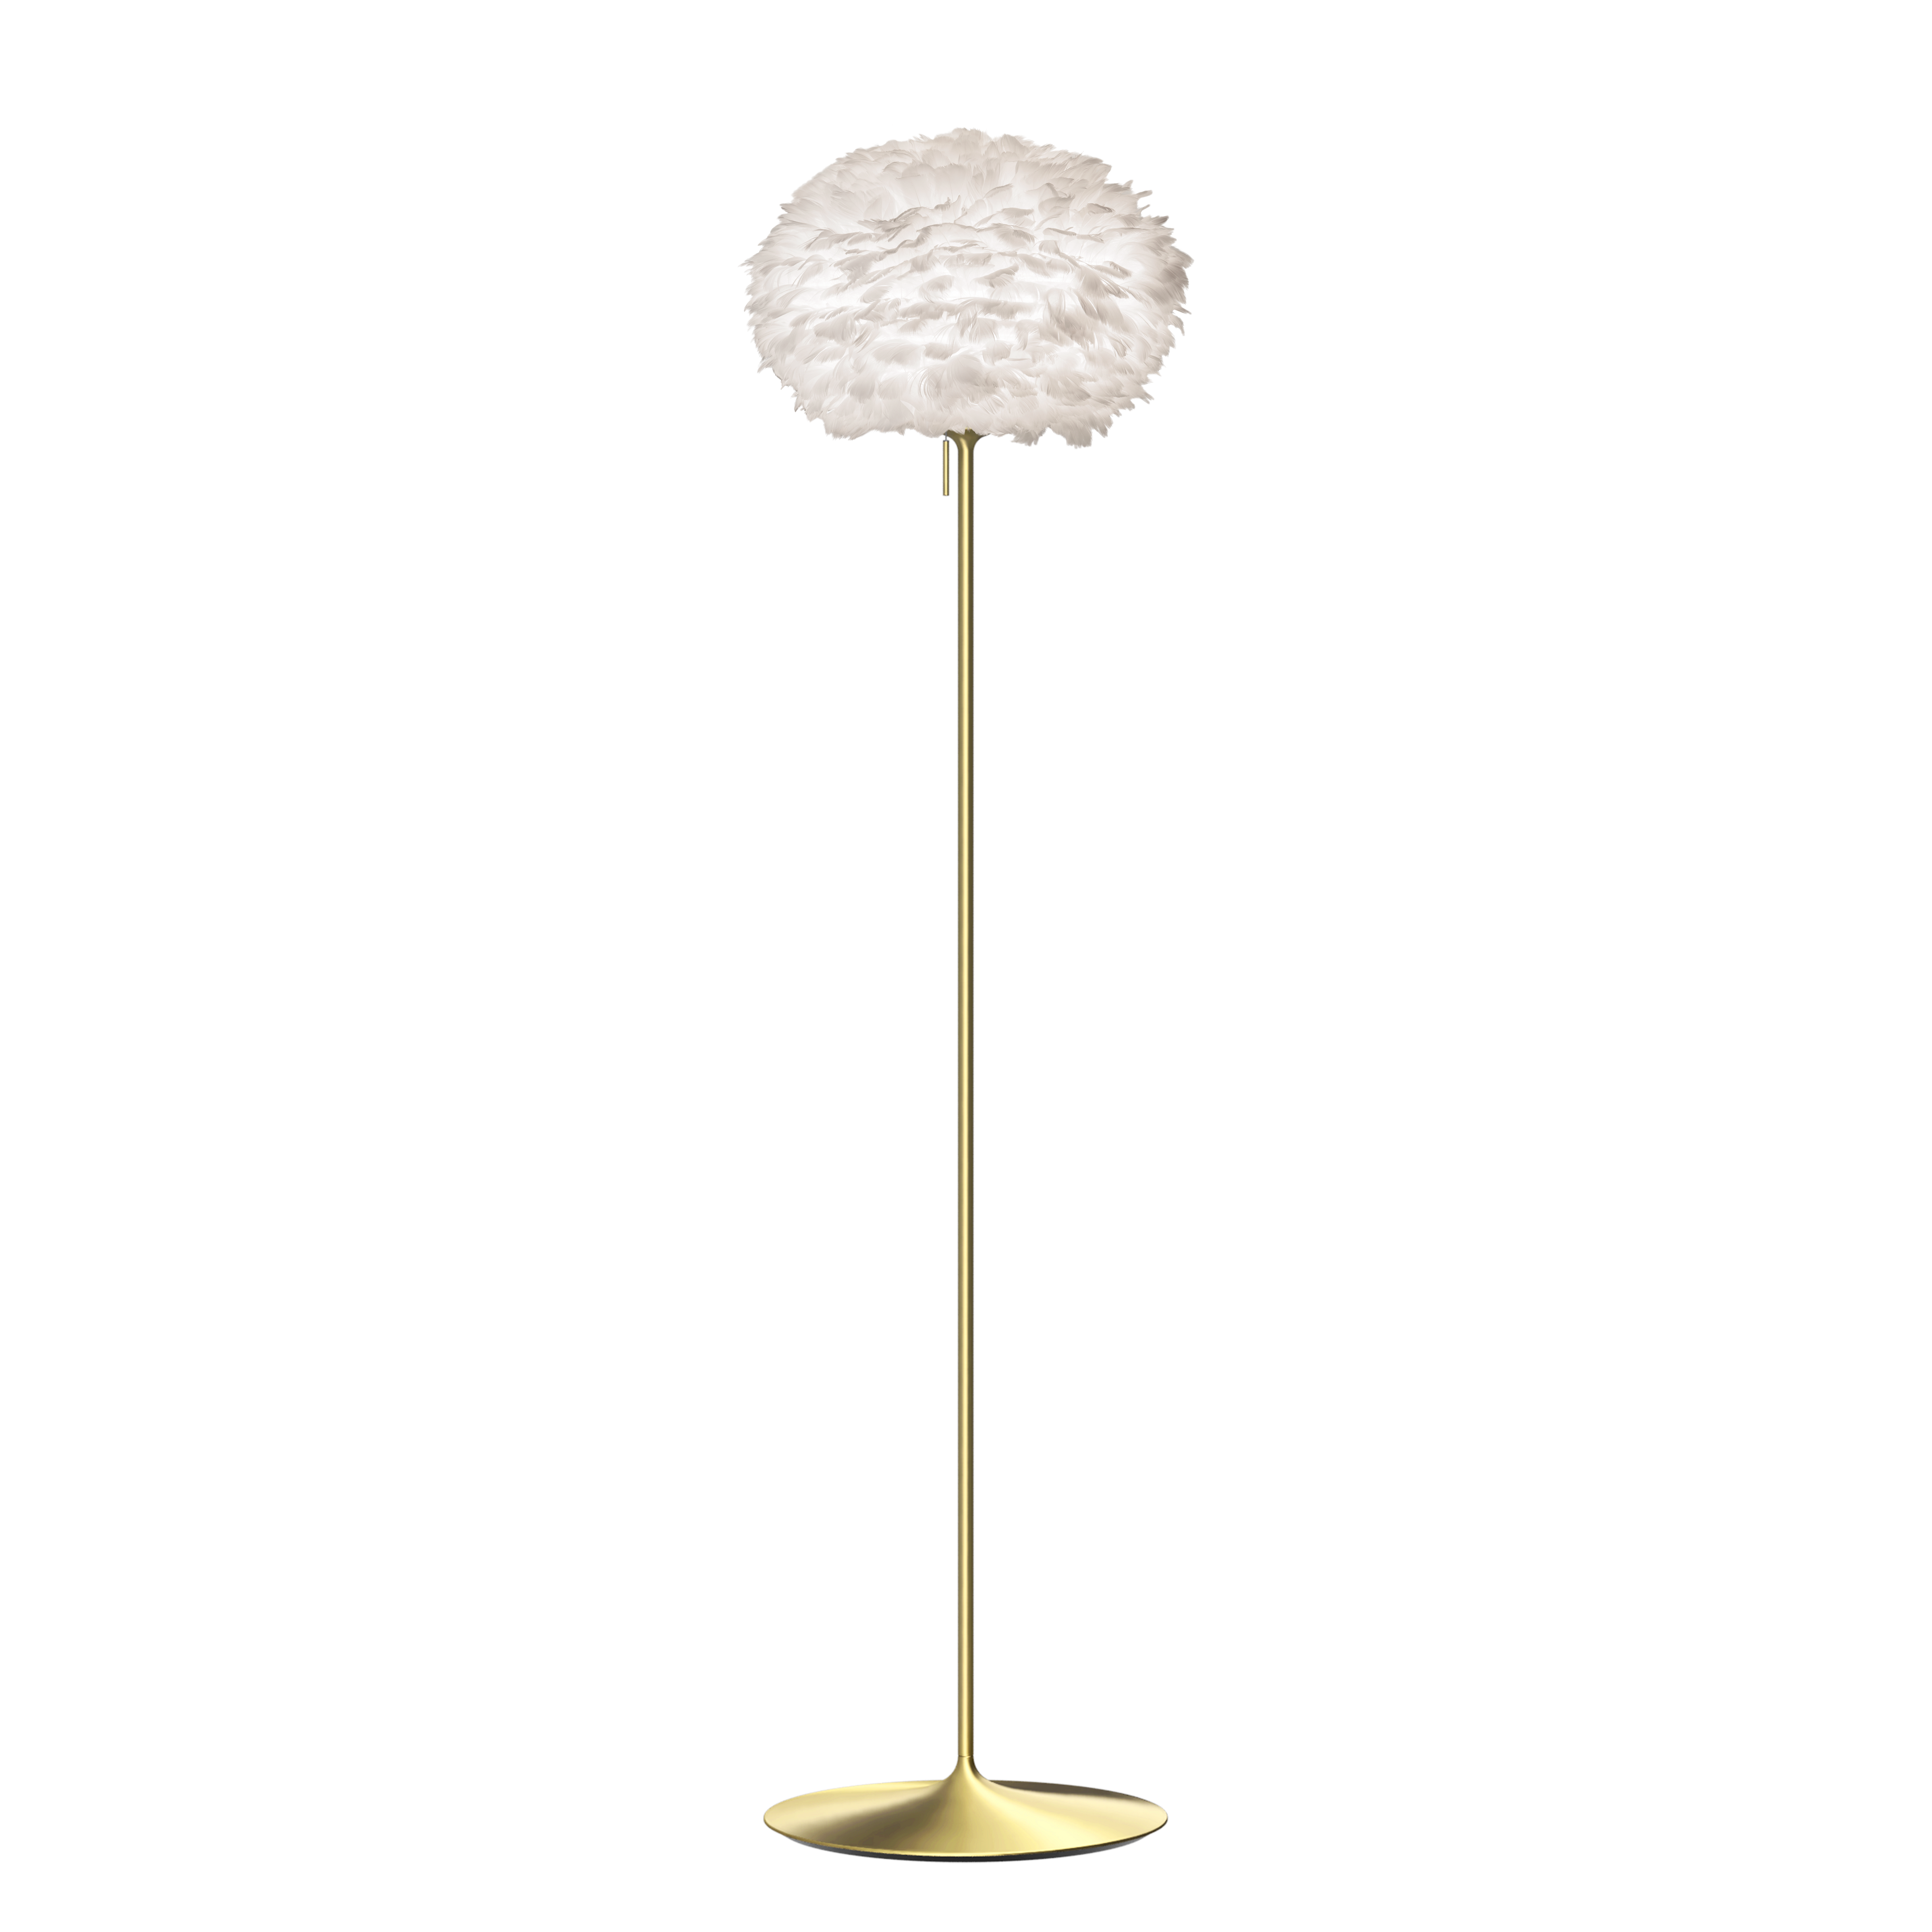 UMAGE Medium White Feather Eos Floor Lamp with Brushed Brass Santé Stand